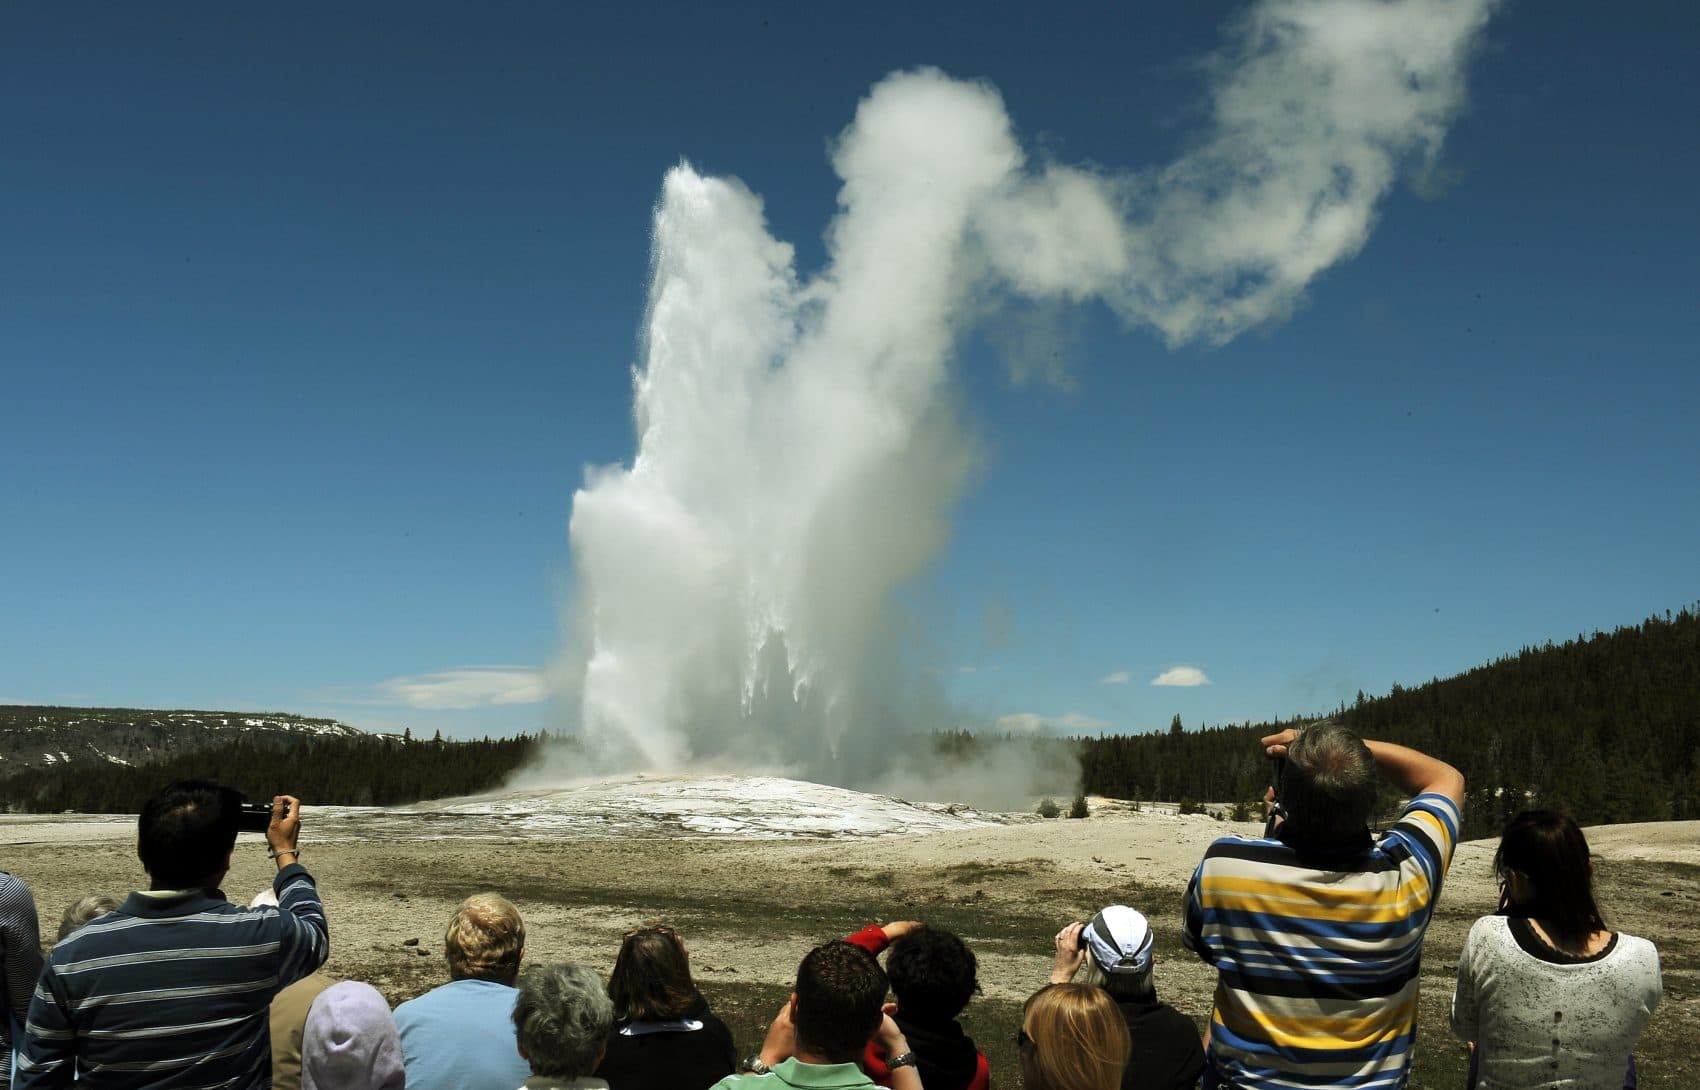 Tourists watch the "Old Faithful" geyser, which erupts on average every 90 minutes, at Yellowstone National Park in Wyoming on June 1, 2011. (Mark Ralston/AFP/Getty Images)